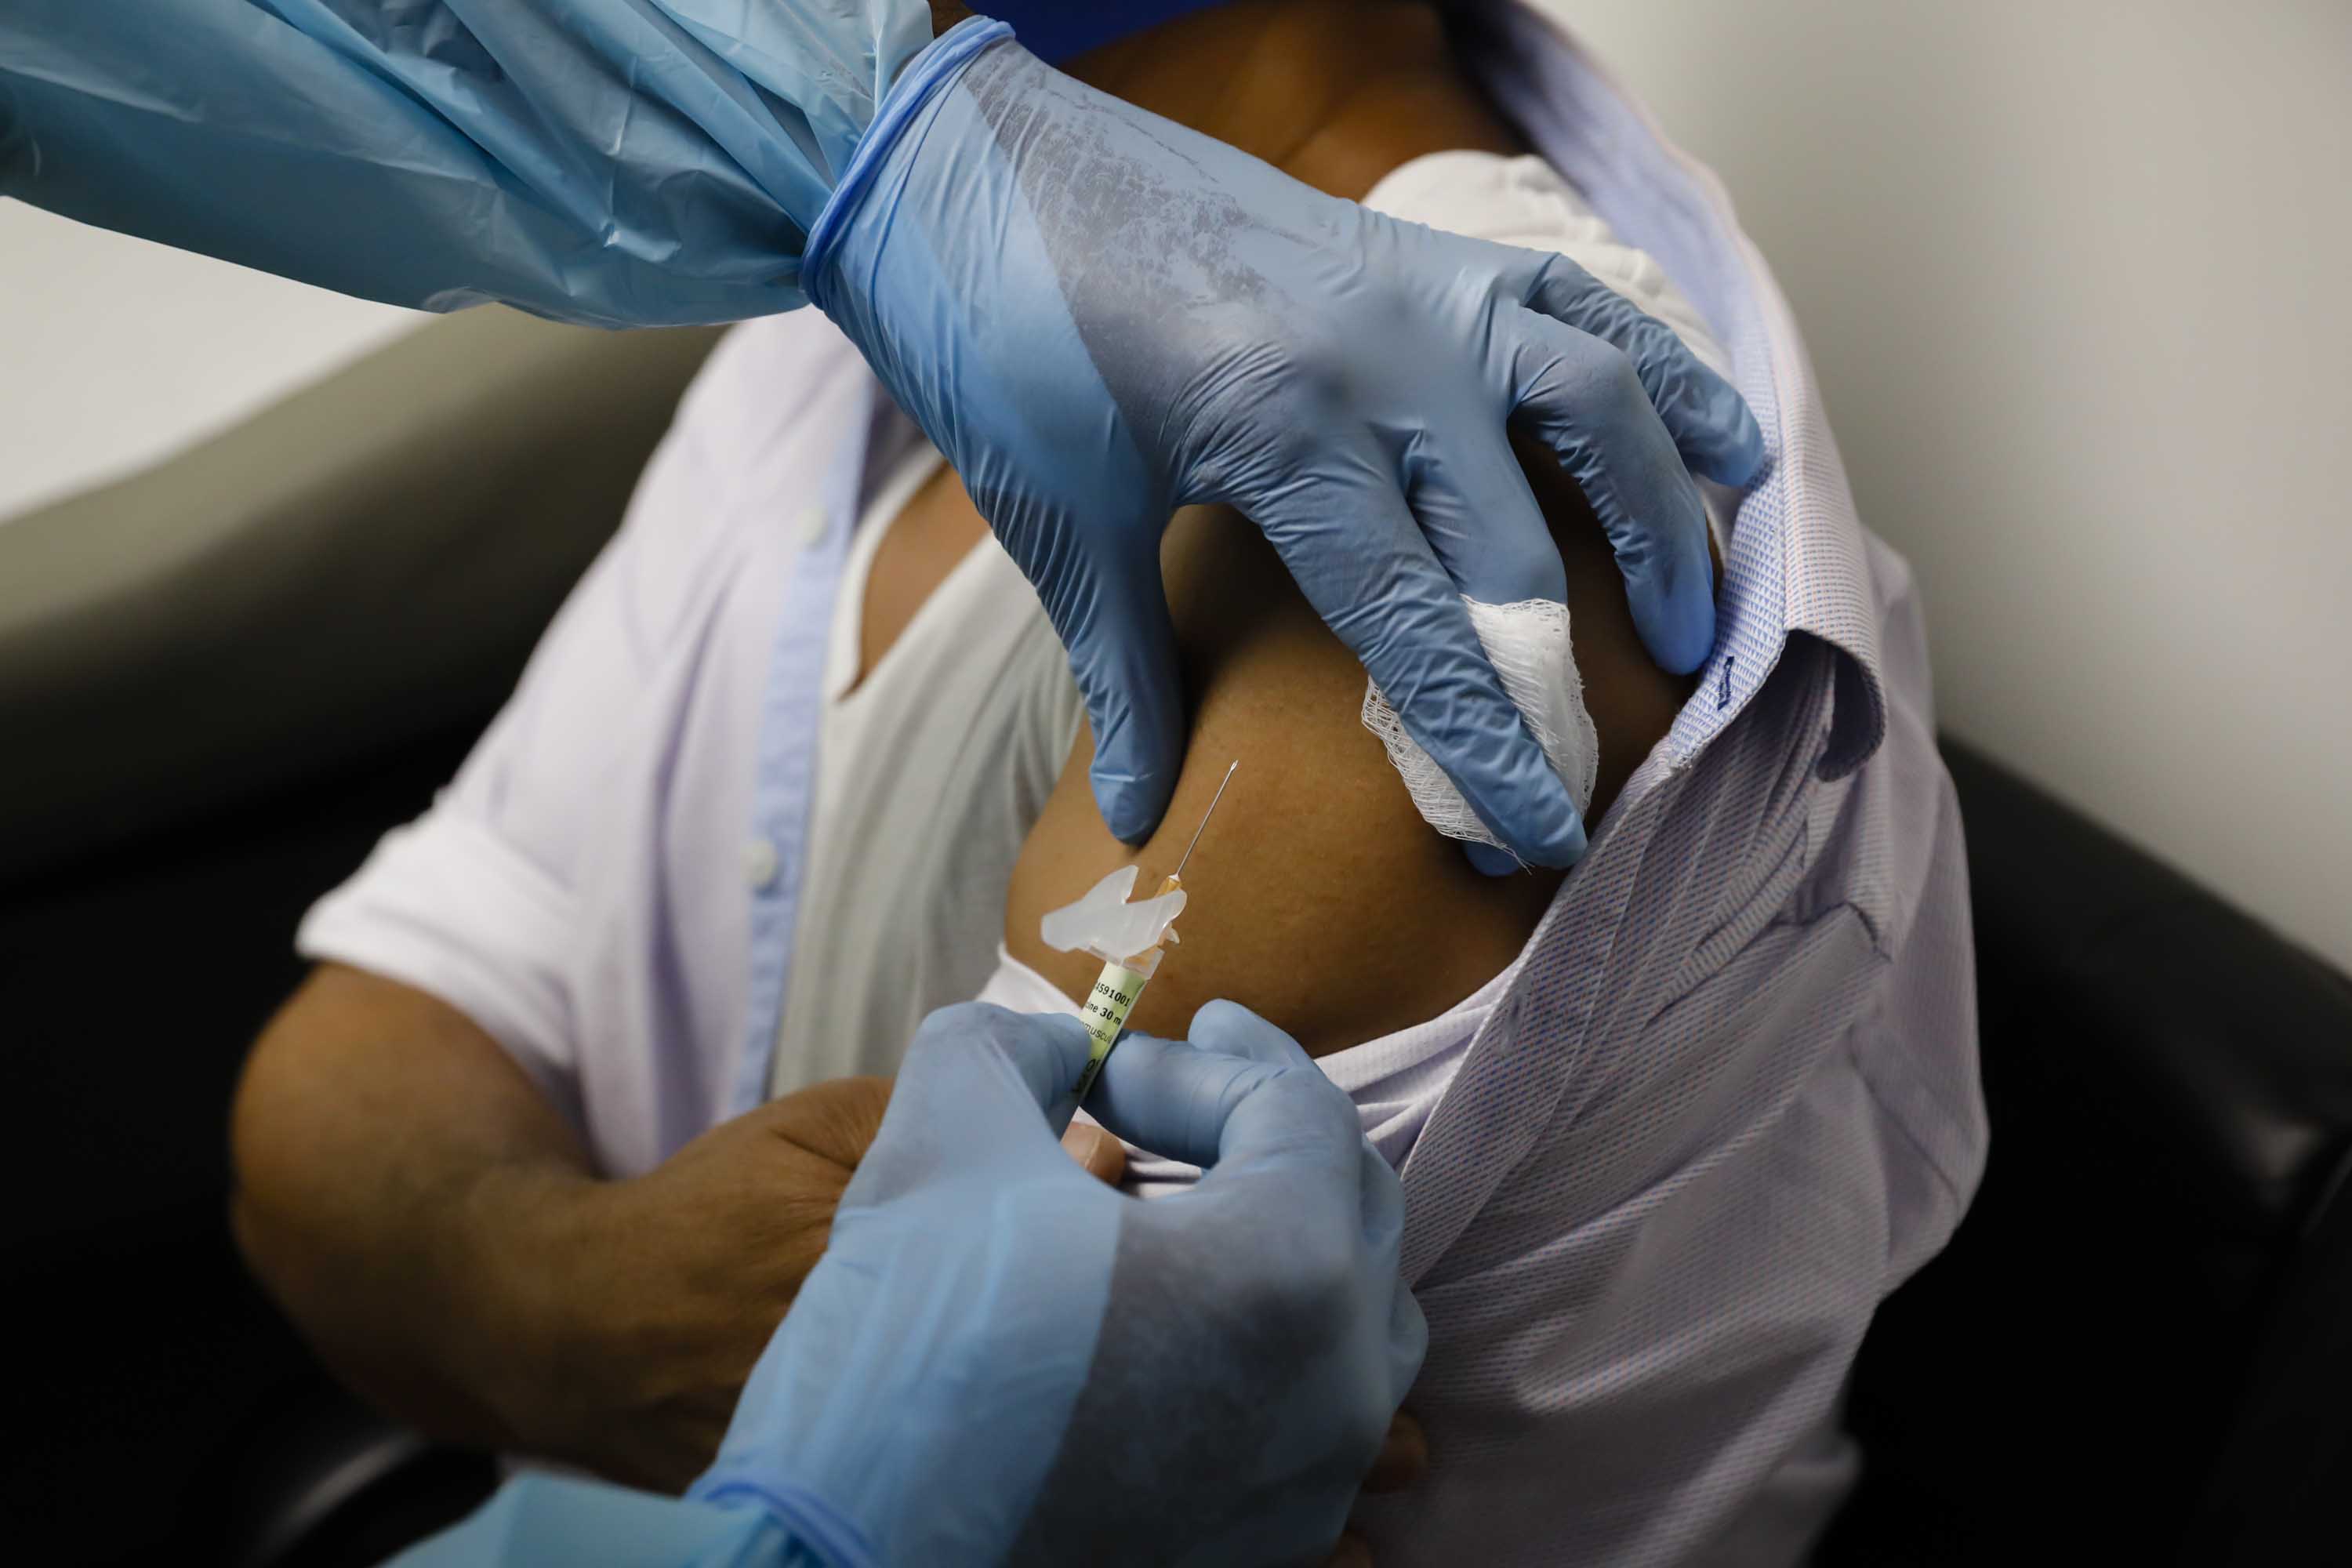 A health worker injects a person during clinical trials for a Covid-19 vaccine at Research Centers of America in Hollywood, Florida, on Wednesday, Sept. 9. 